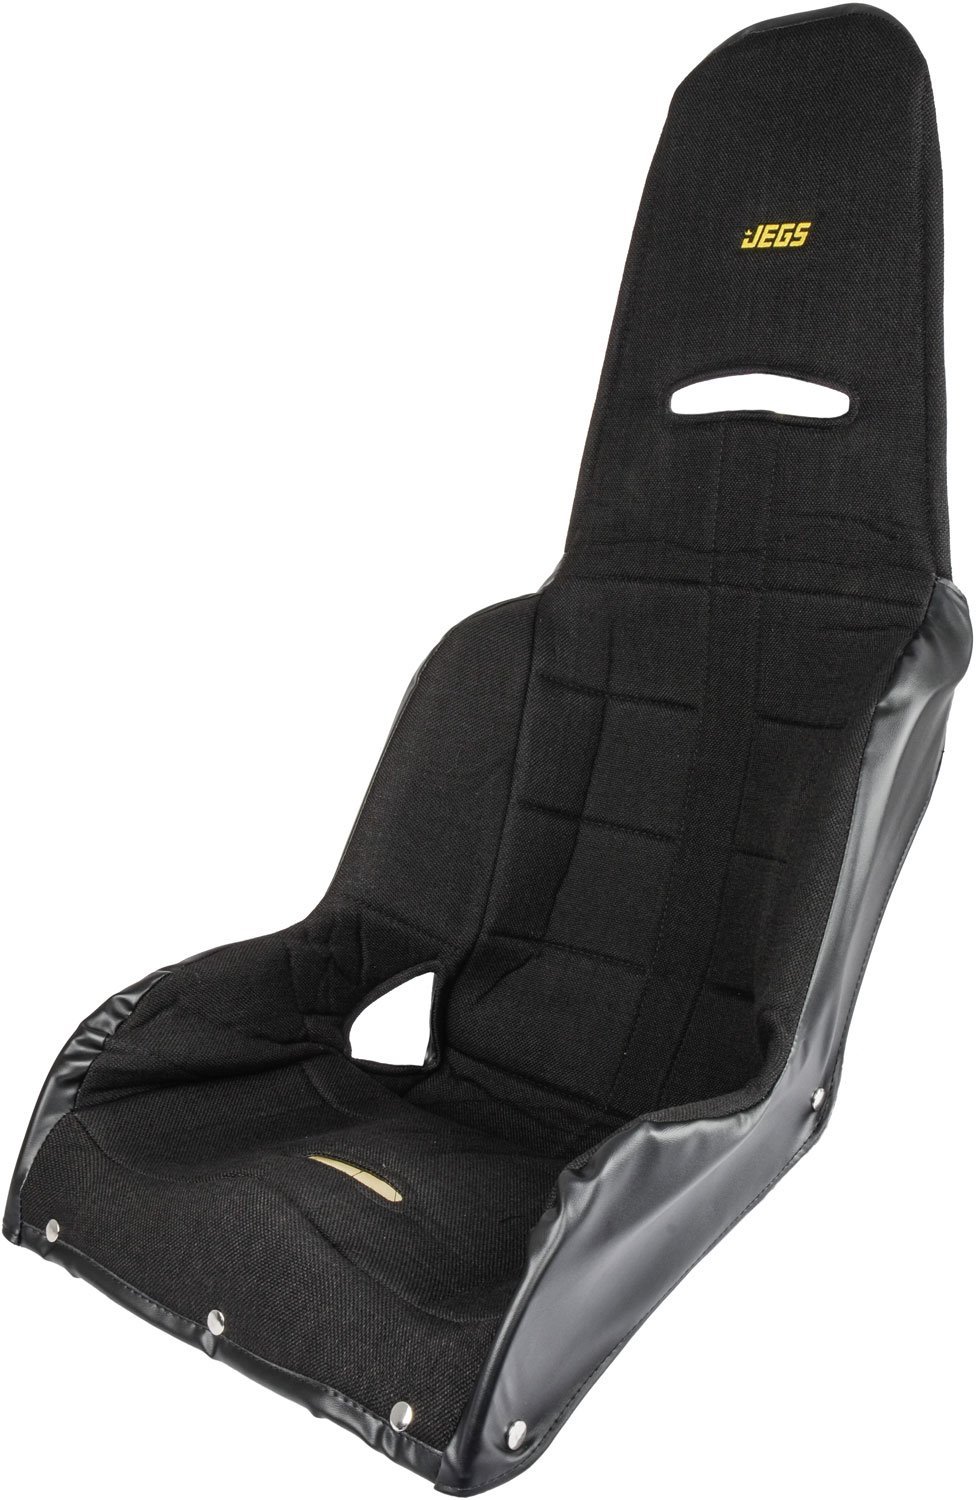 Racing Seat Cover 18